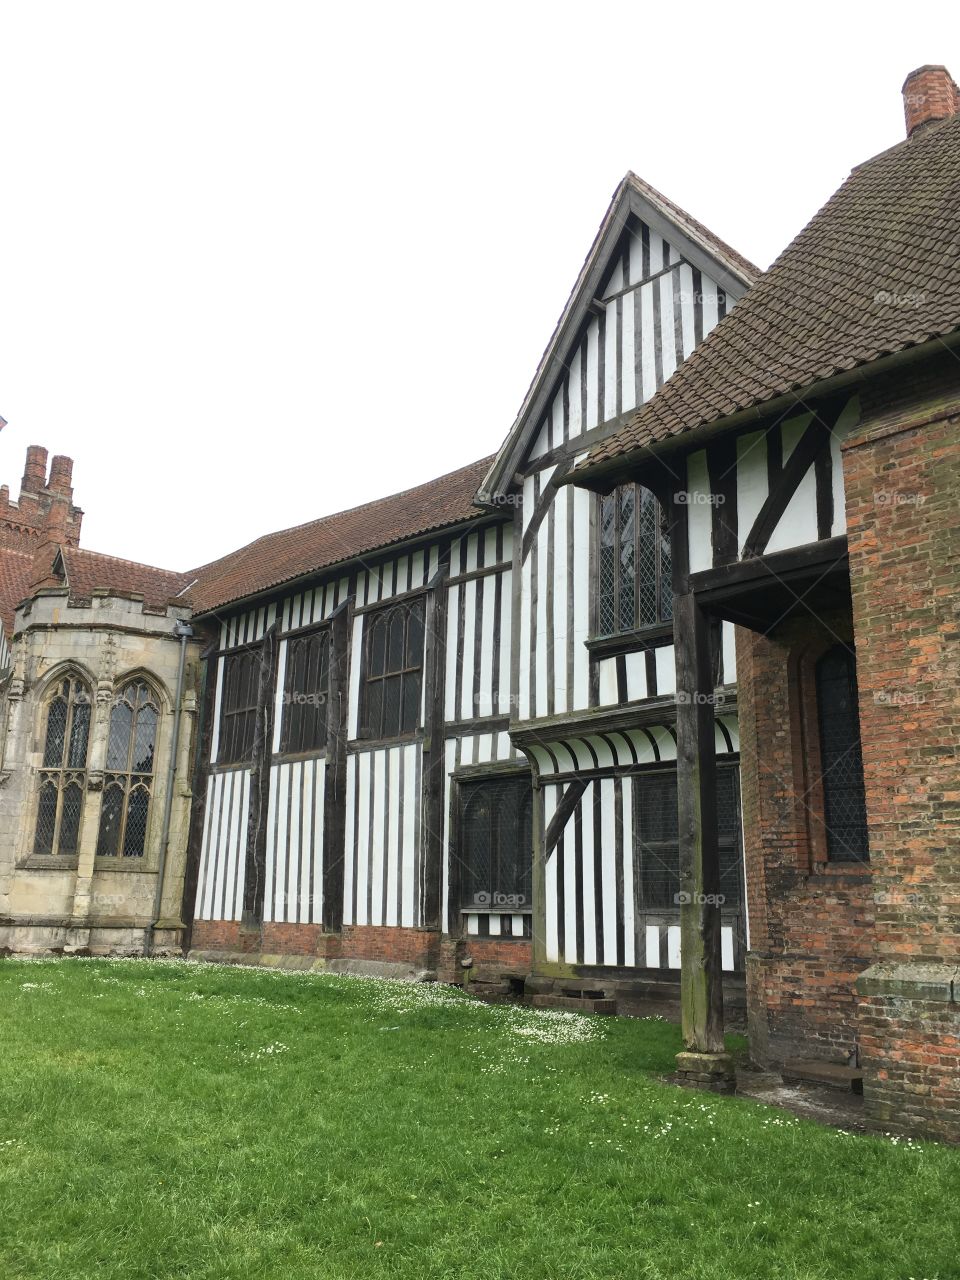 Exterior view of brickwork and timber framing of the medieval Manor House at Gainsborough Old Hall